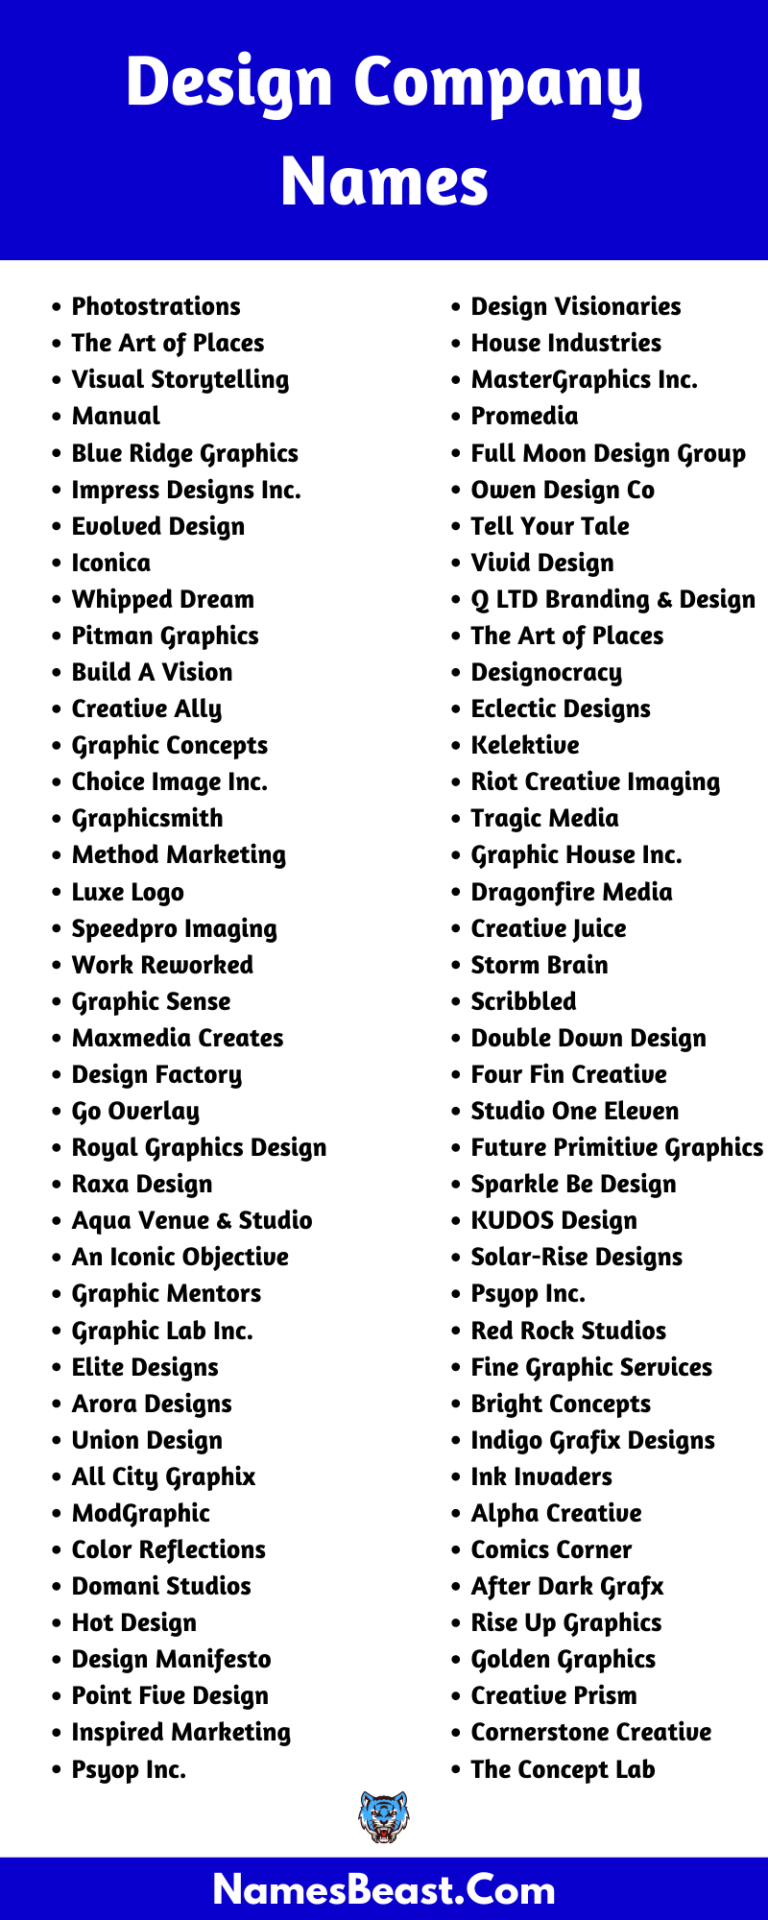 750+ Design Company Names and Business Name Ideas